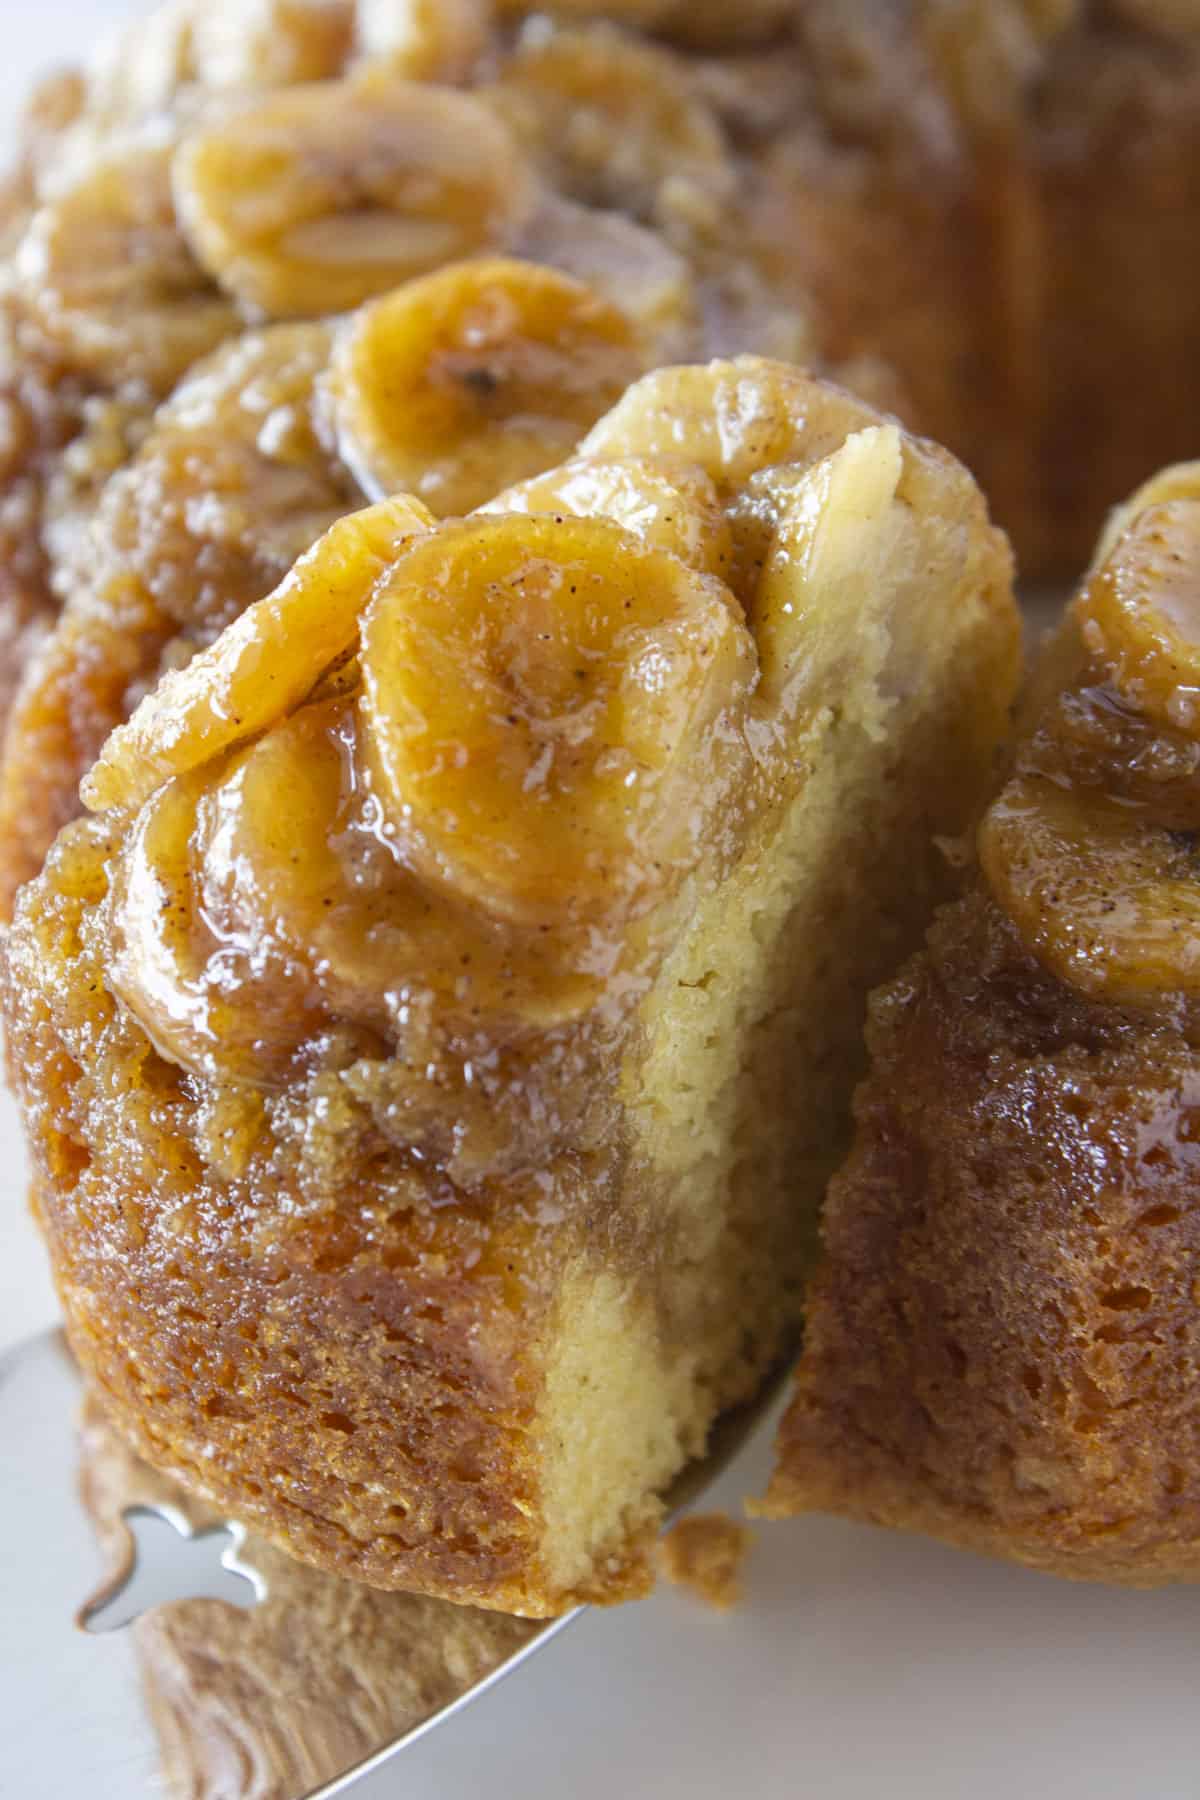 A close up photo of serving a slice of banana upside down cake.